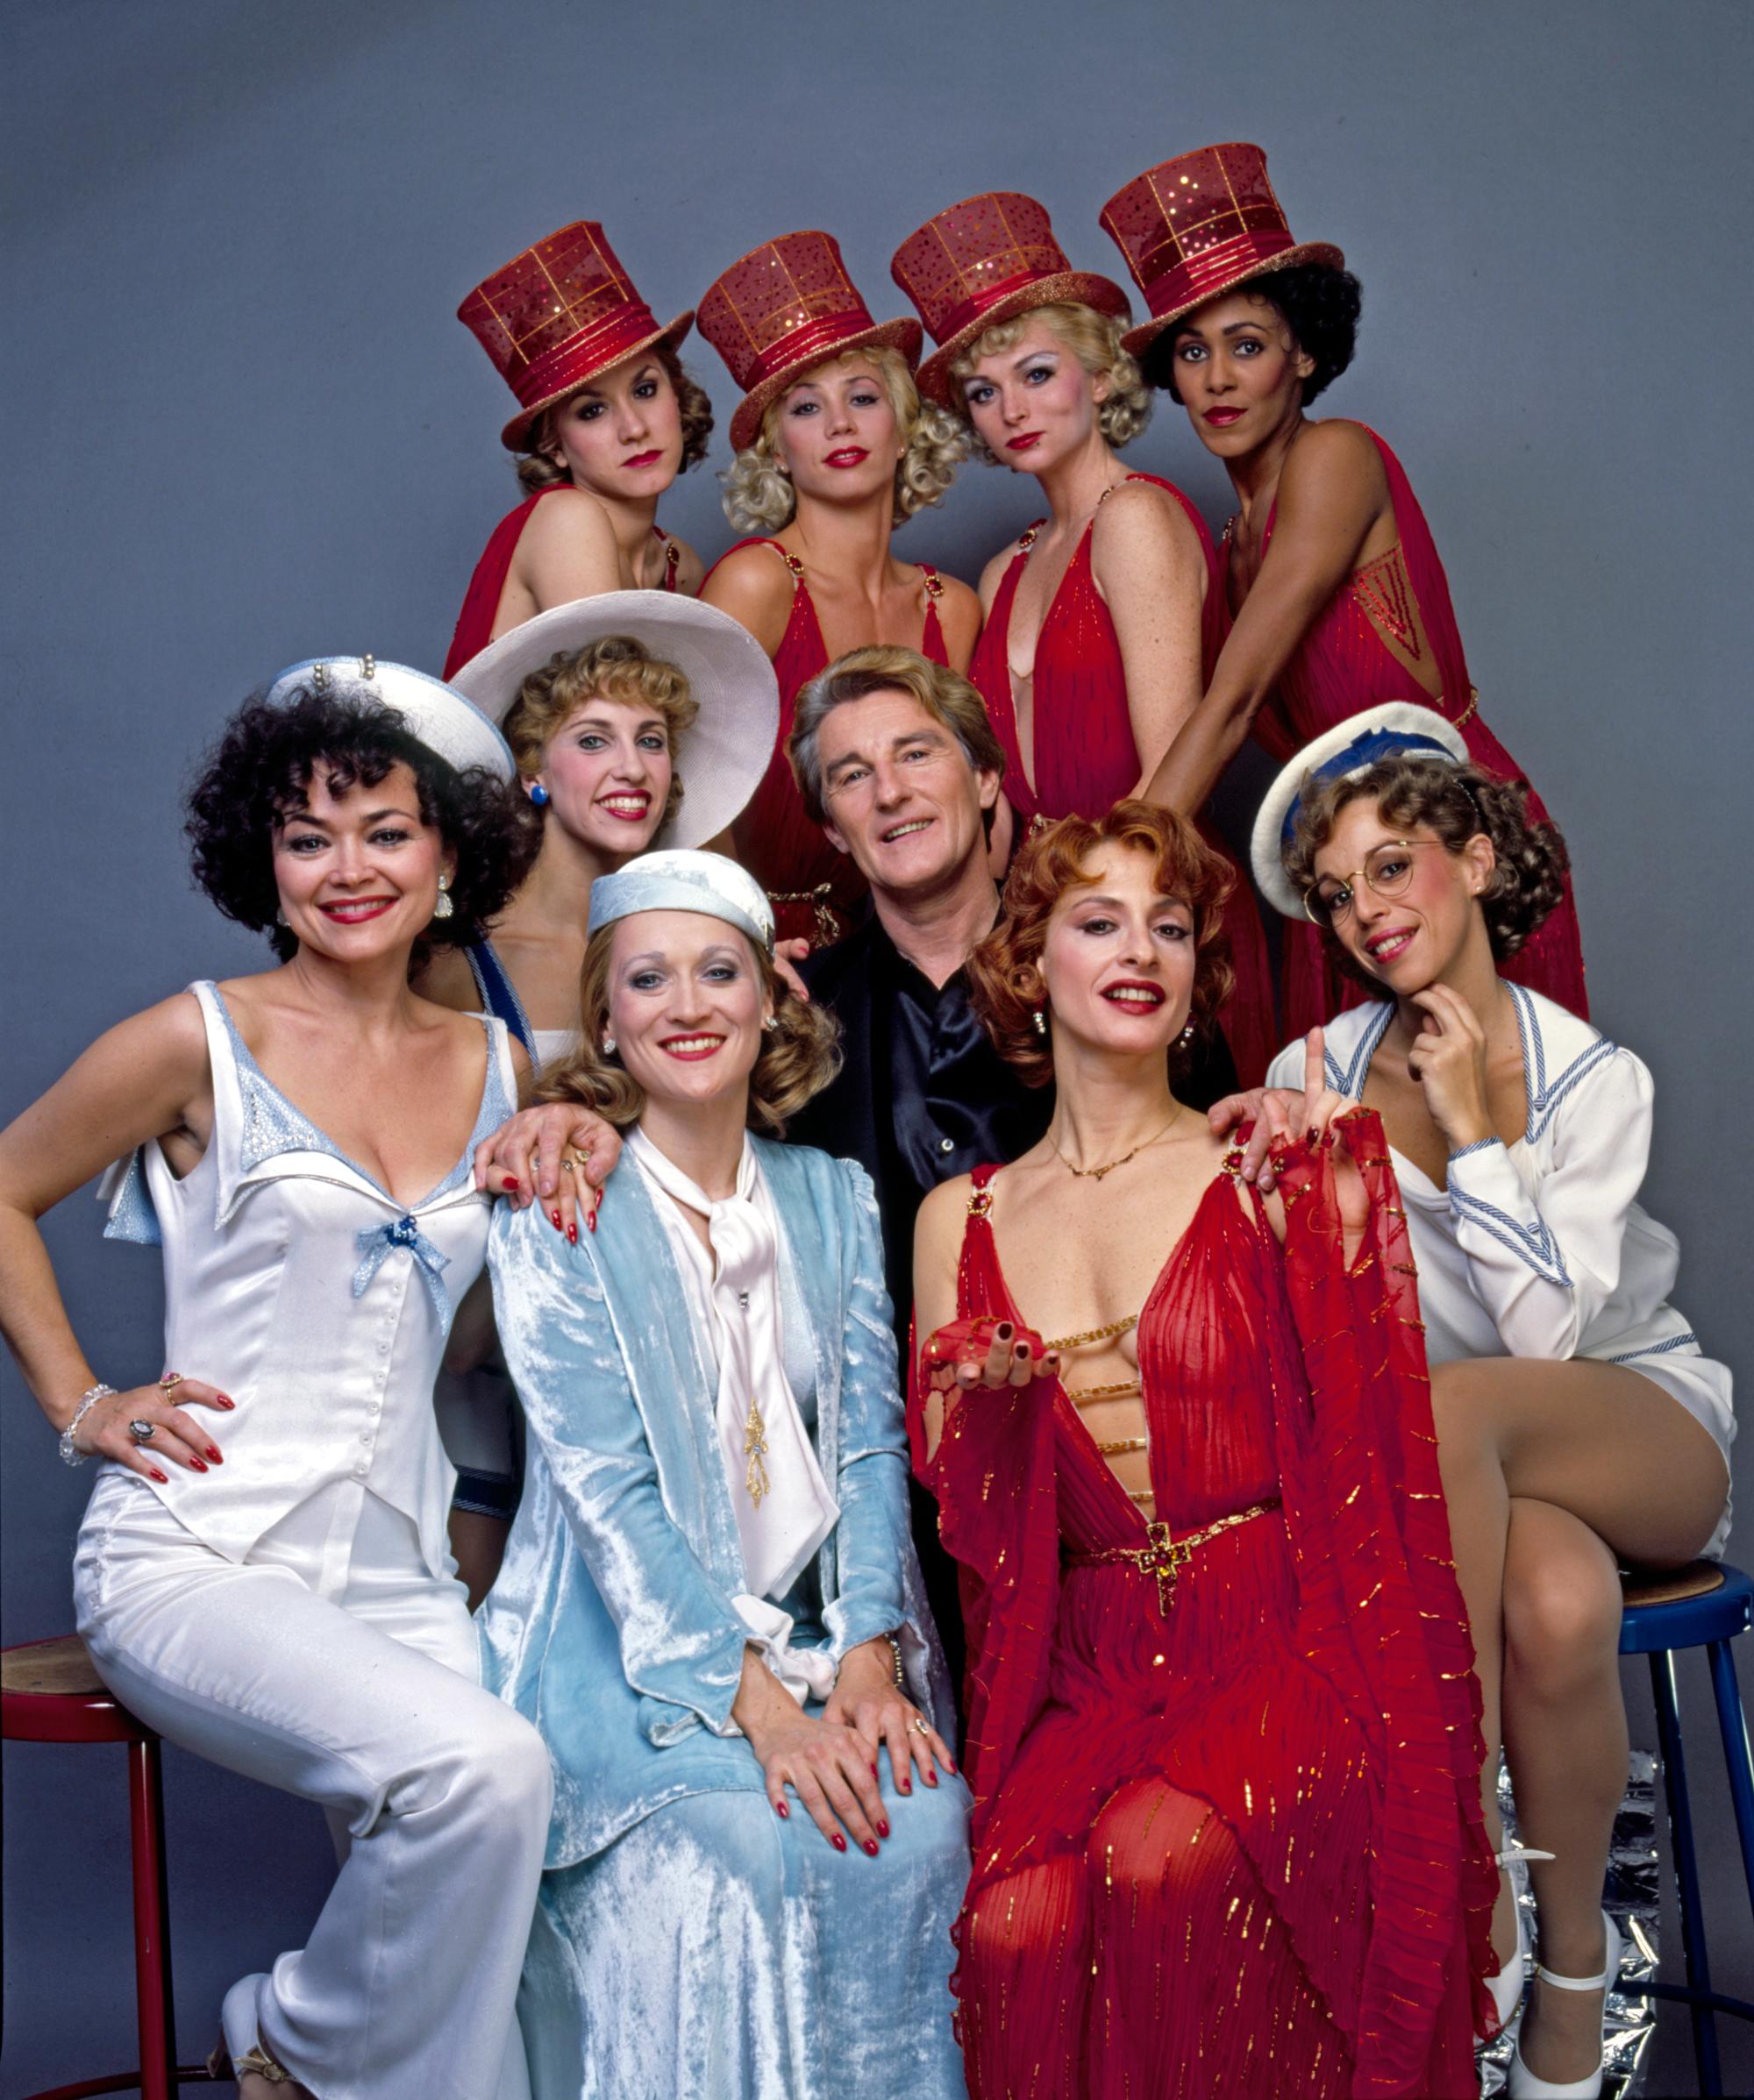 Patti LuPone 'Anything Goes' Dance Magazine Cover 17 x 22" Exhibition Photograph